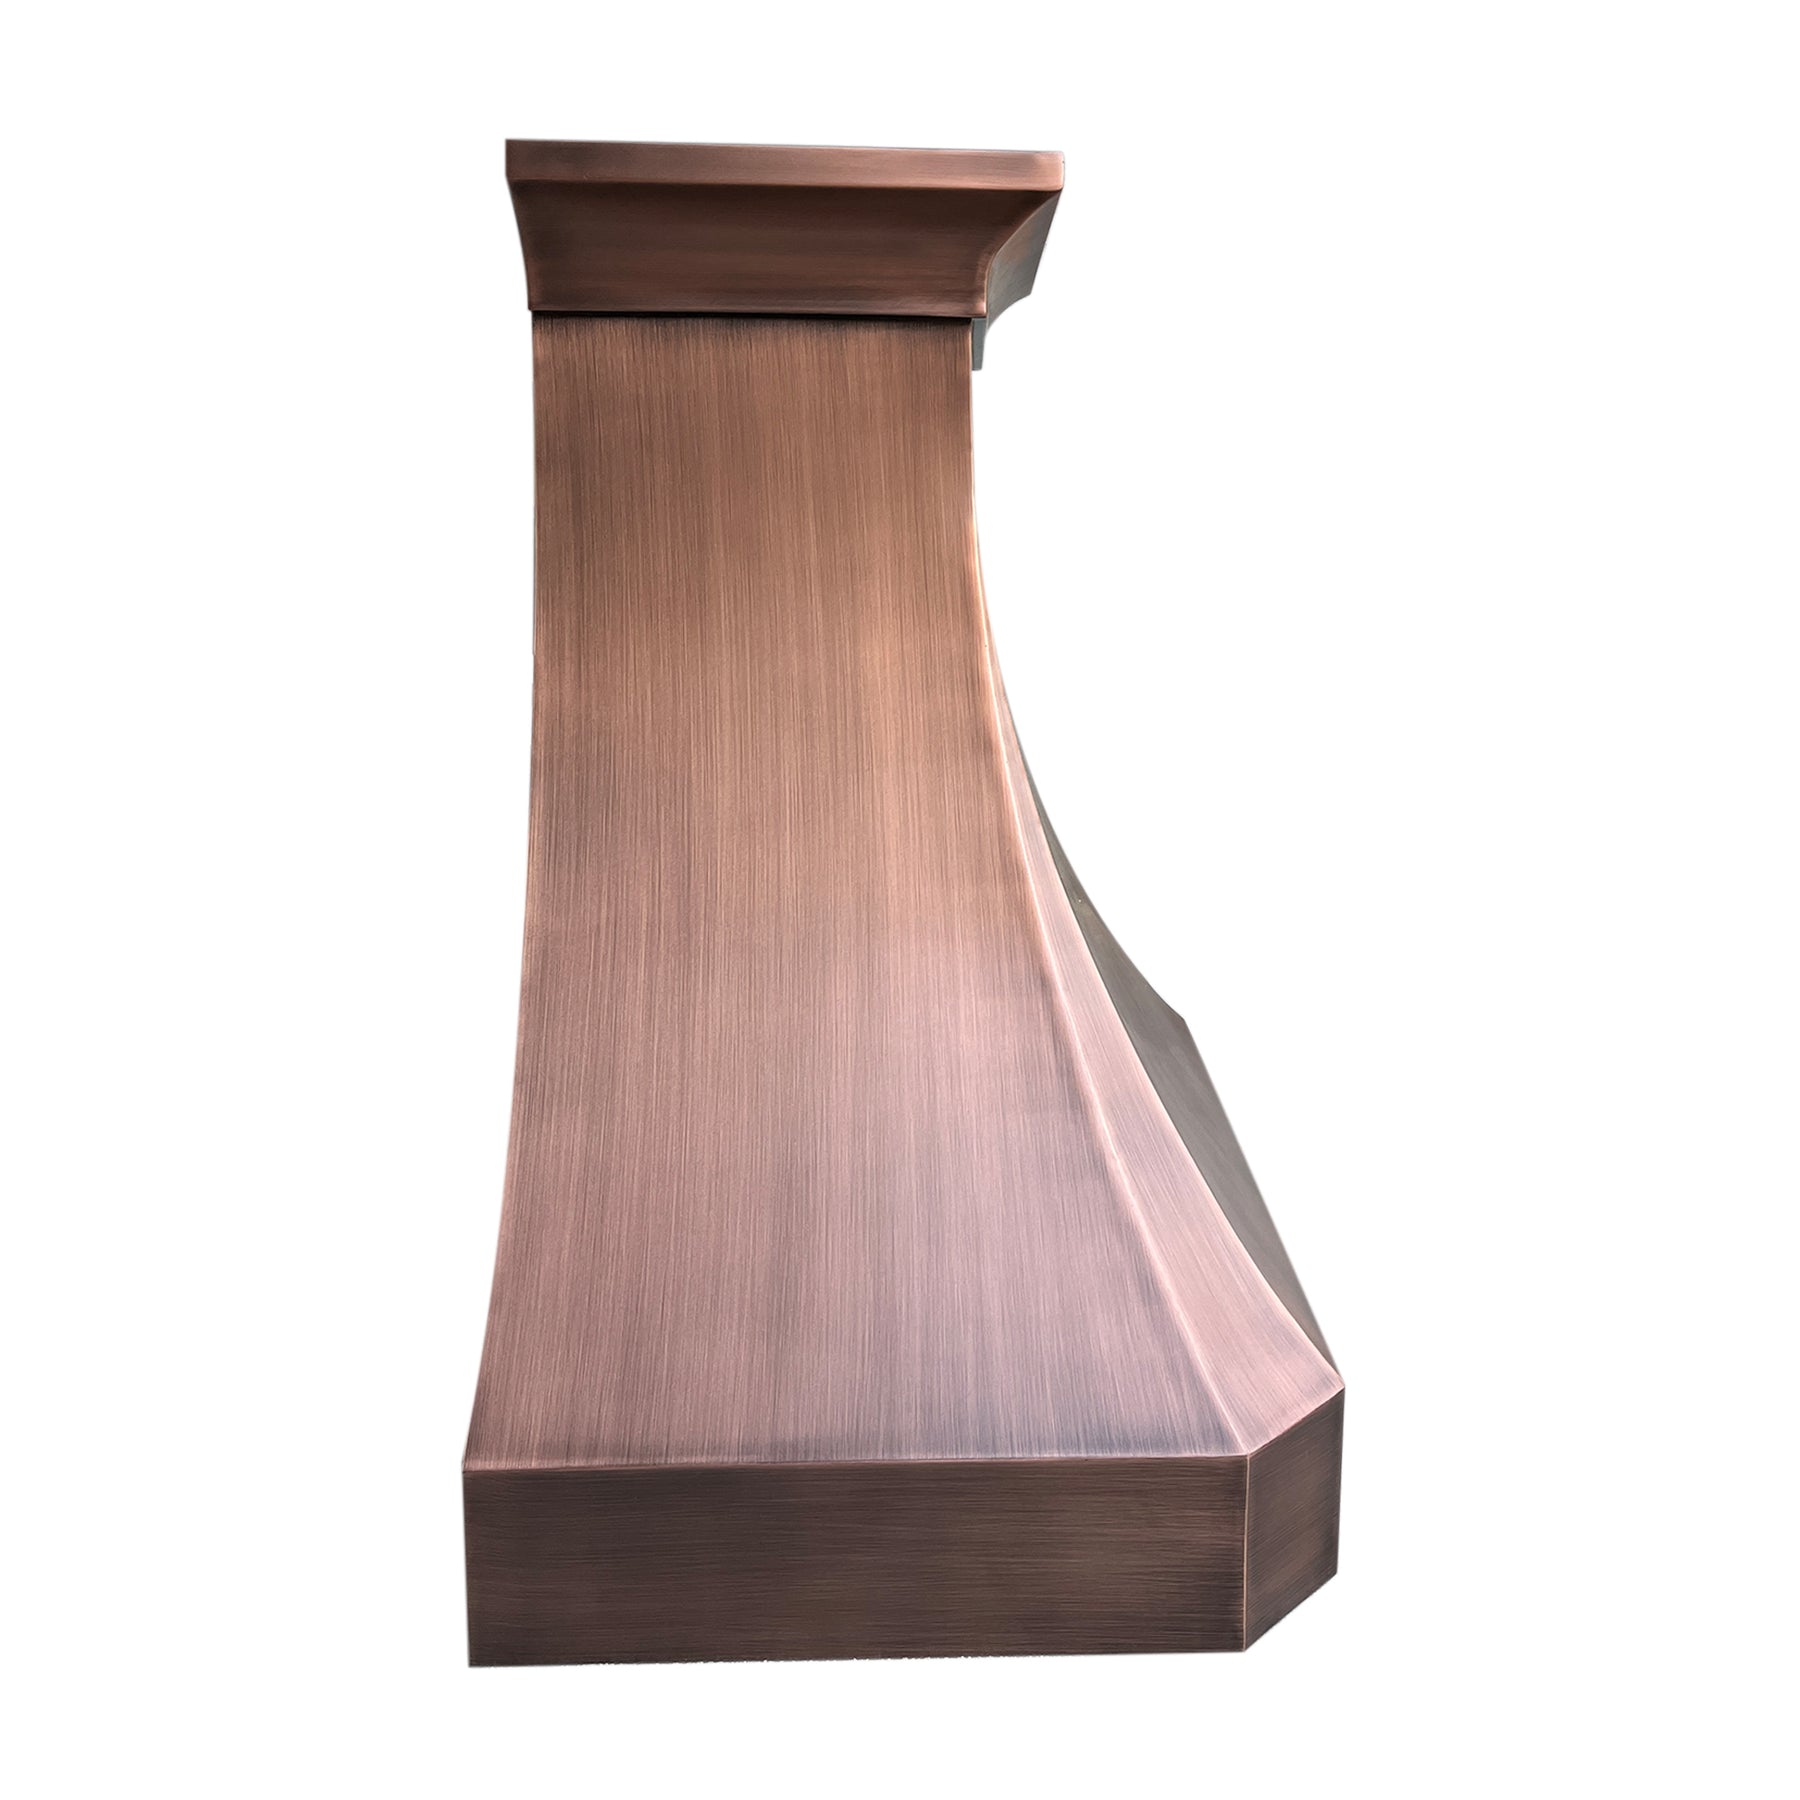 Fobest copper range hood with smooth texture 